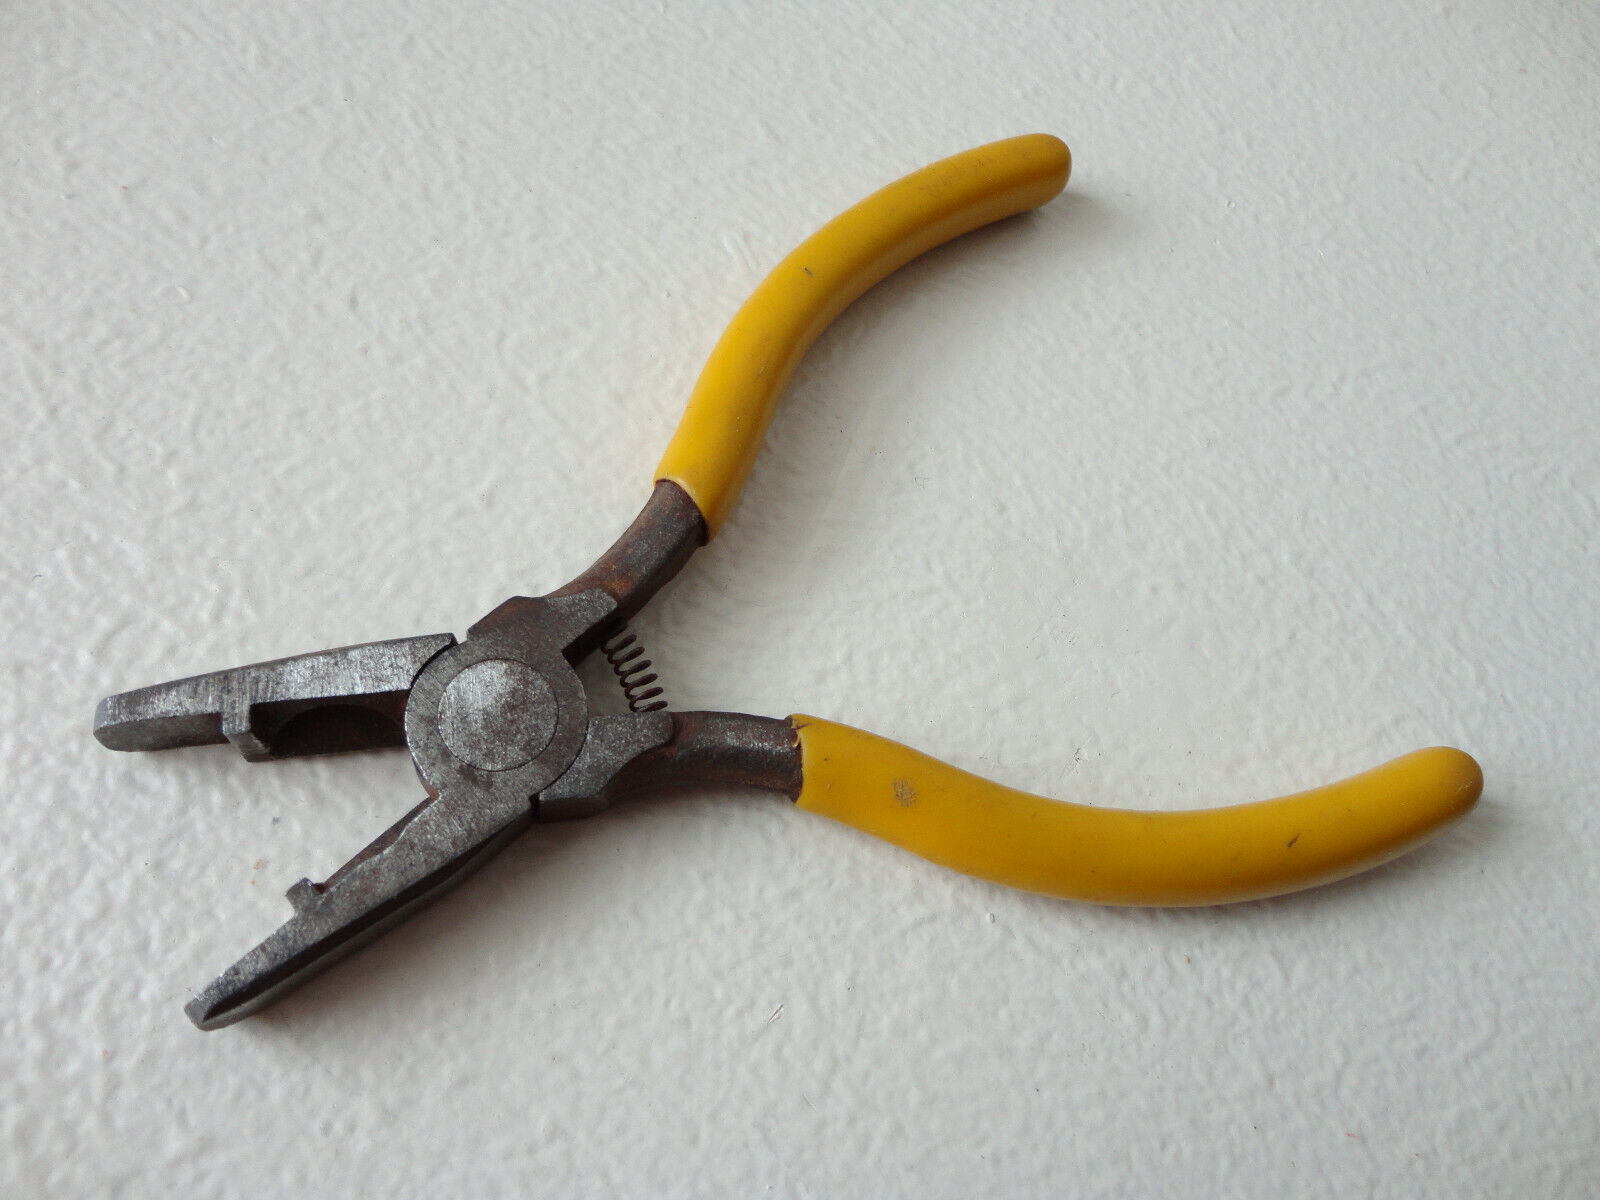 Unusual Specialty Pliers With Cutting Edge, Spring And Jaws That Do Not Close